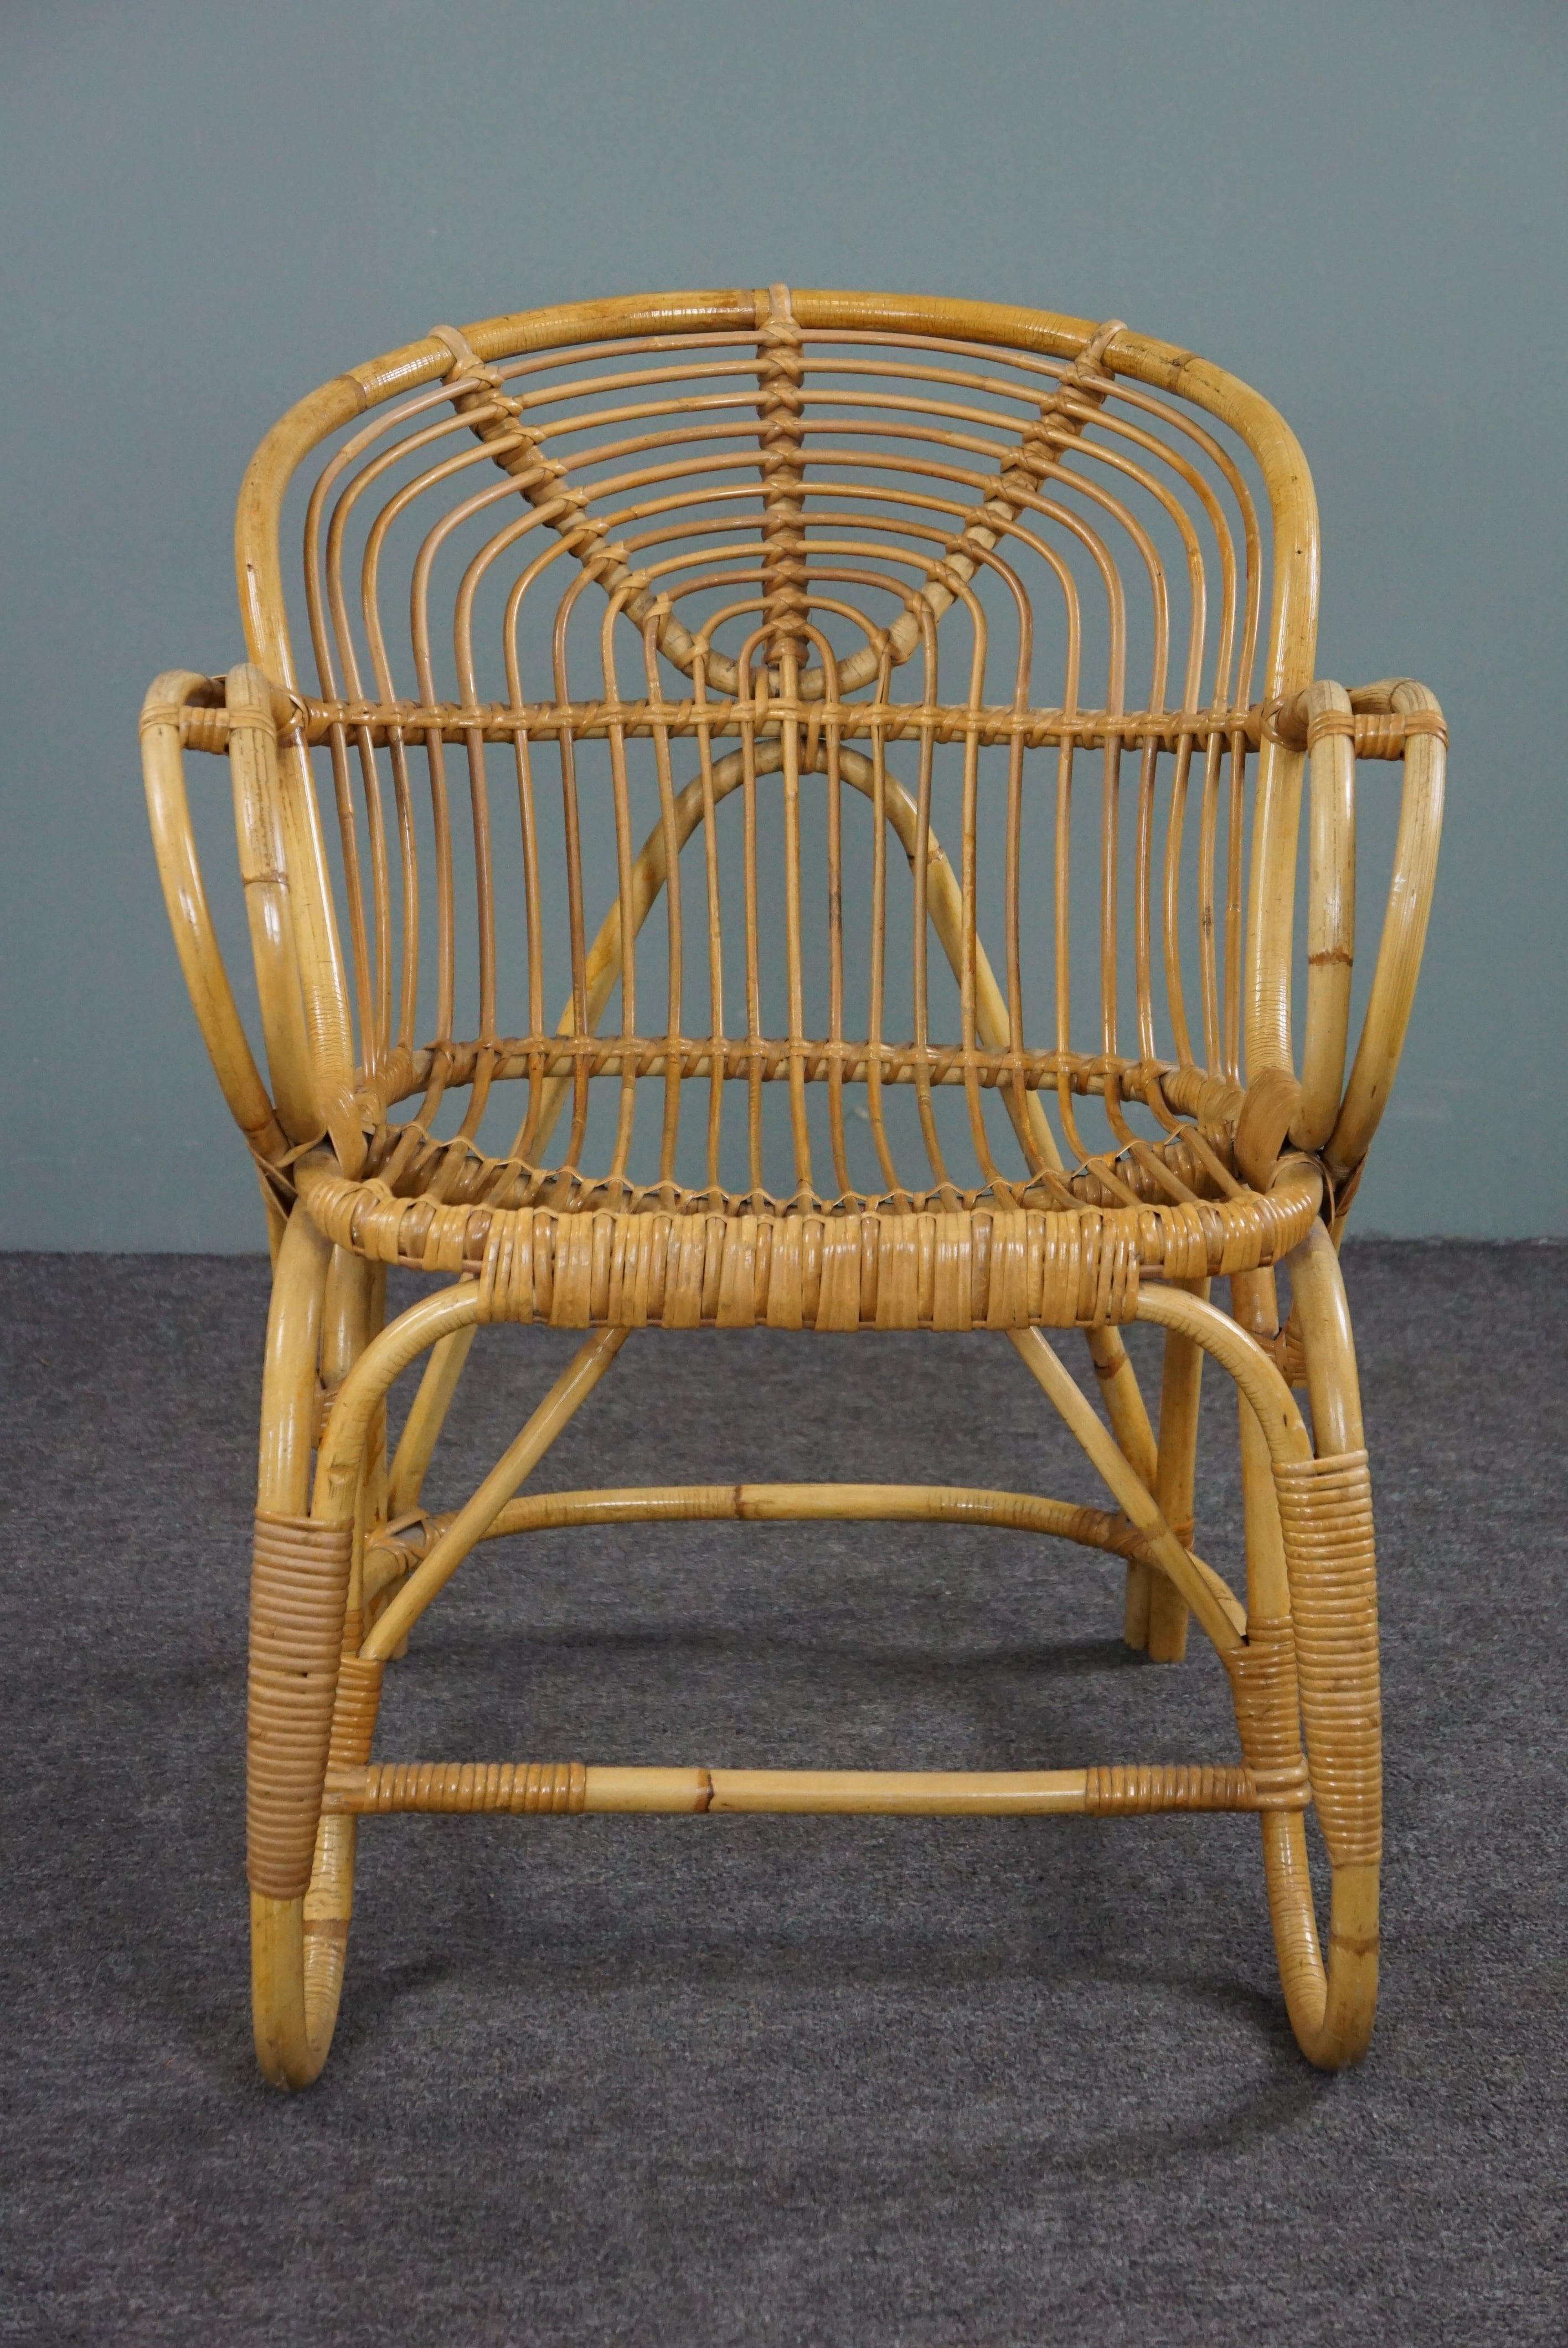 Offered is this unique and very beautifully designed armchair made in the 1950s in the Netherlands.
This rare rattan armchair has a beautiful subtle design and beautiful round details and graceful armrests and legs. This armchair was handmade in the